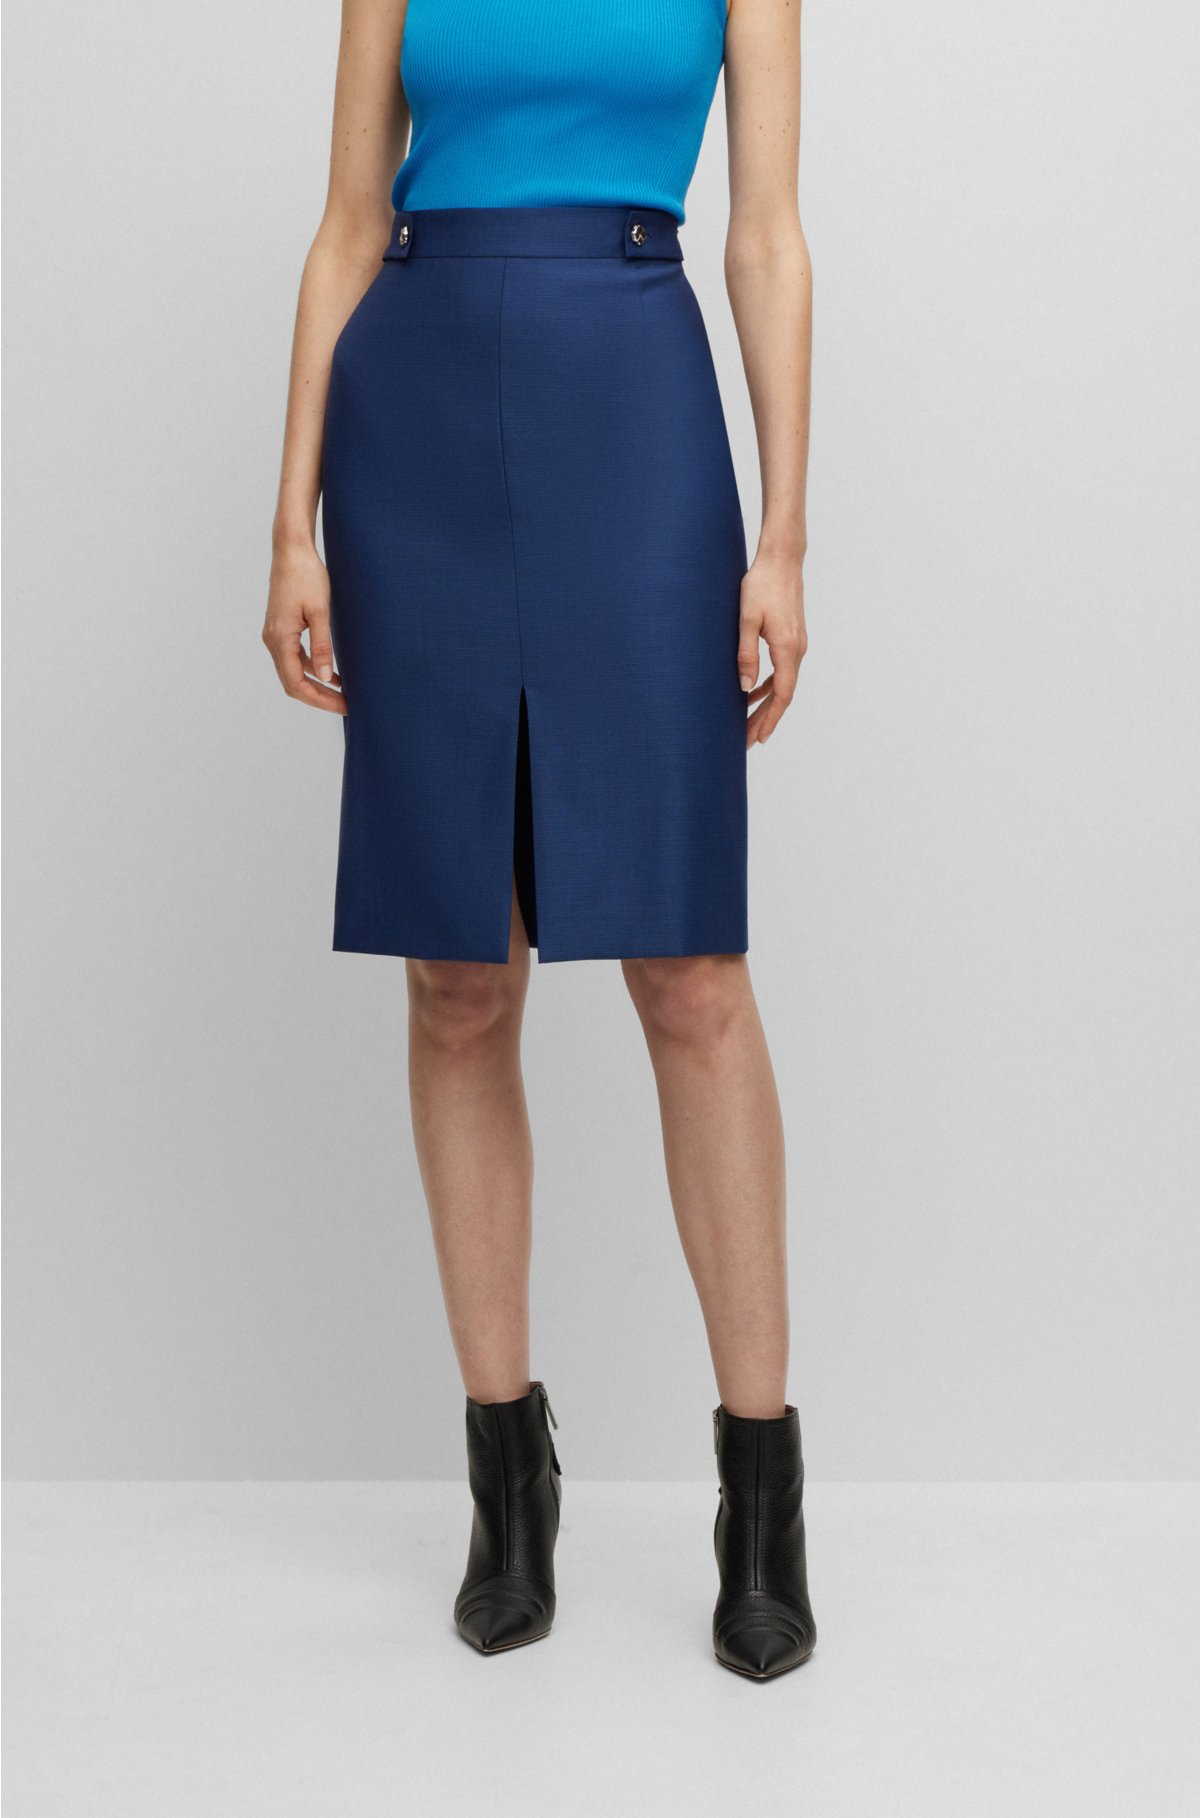 BOSS - Slim-fit pencil skirt in grained leather